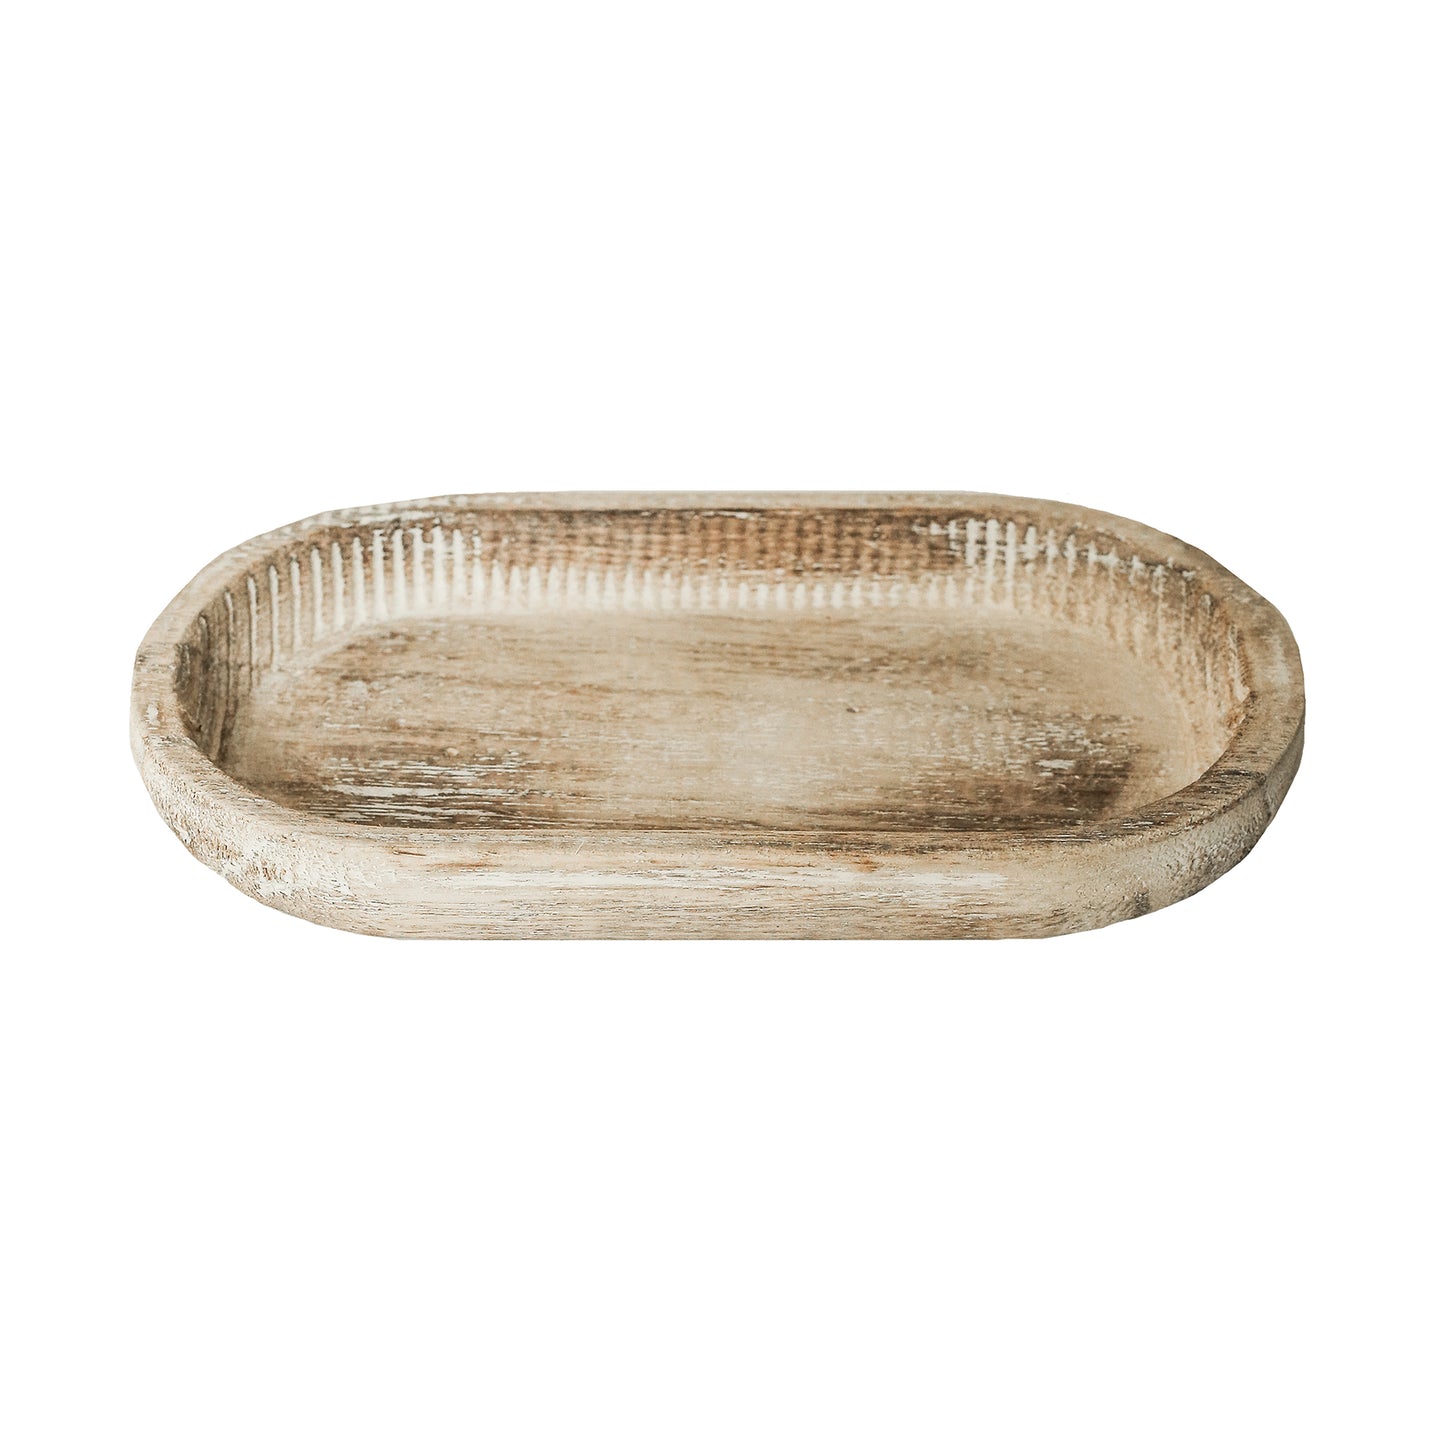 Load image into Gallery viewer, Oval Wood Tray
